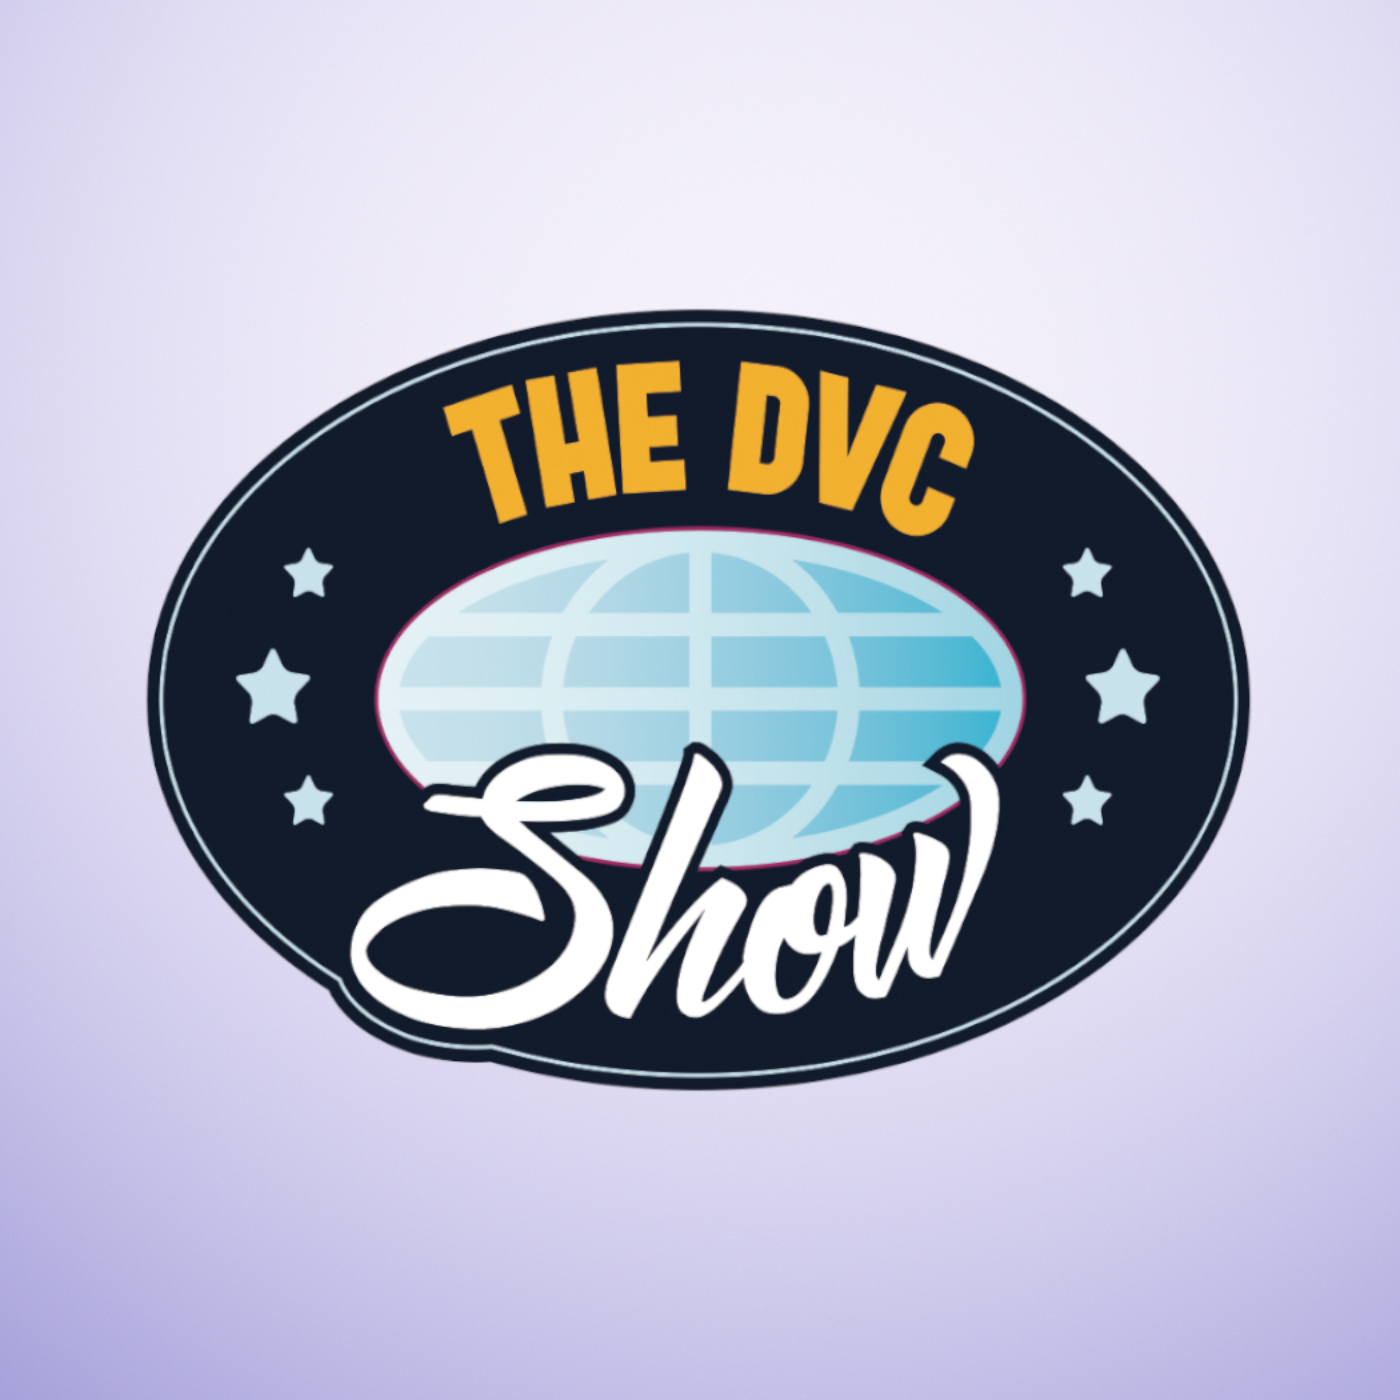 The DVC Show Podcast – 02/03/20